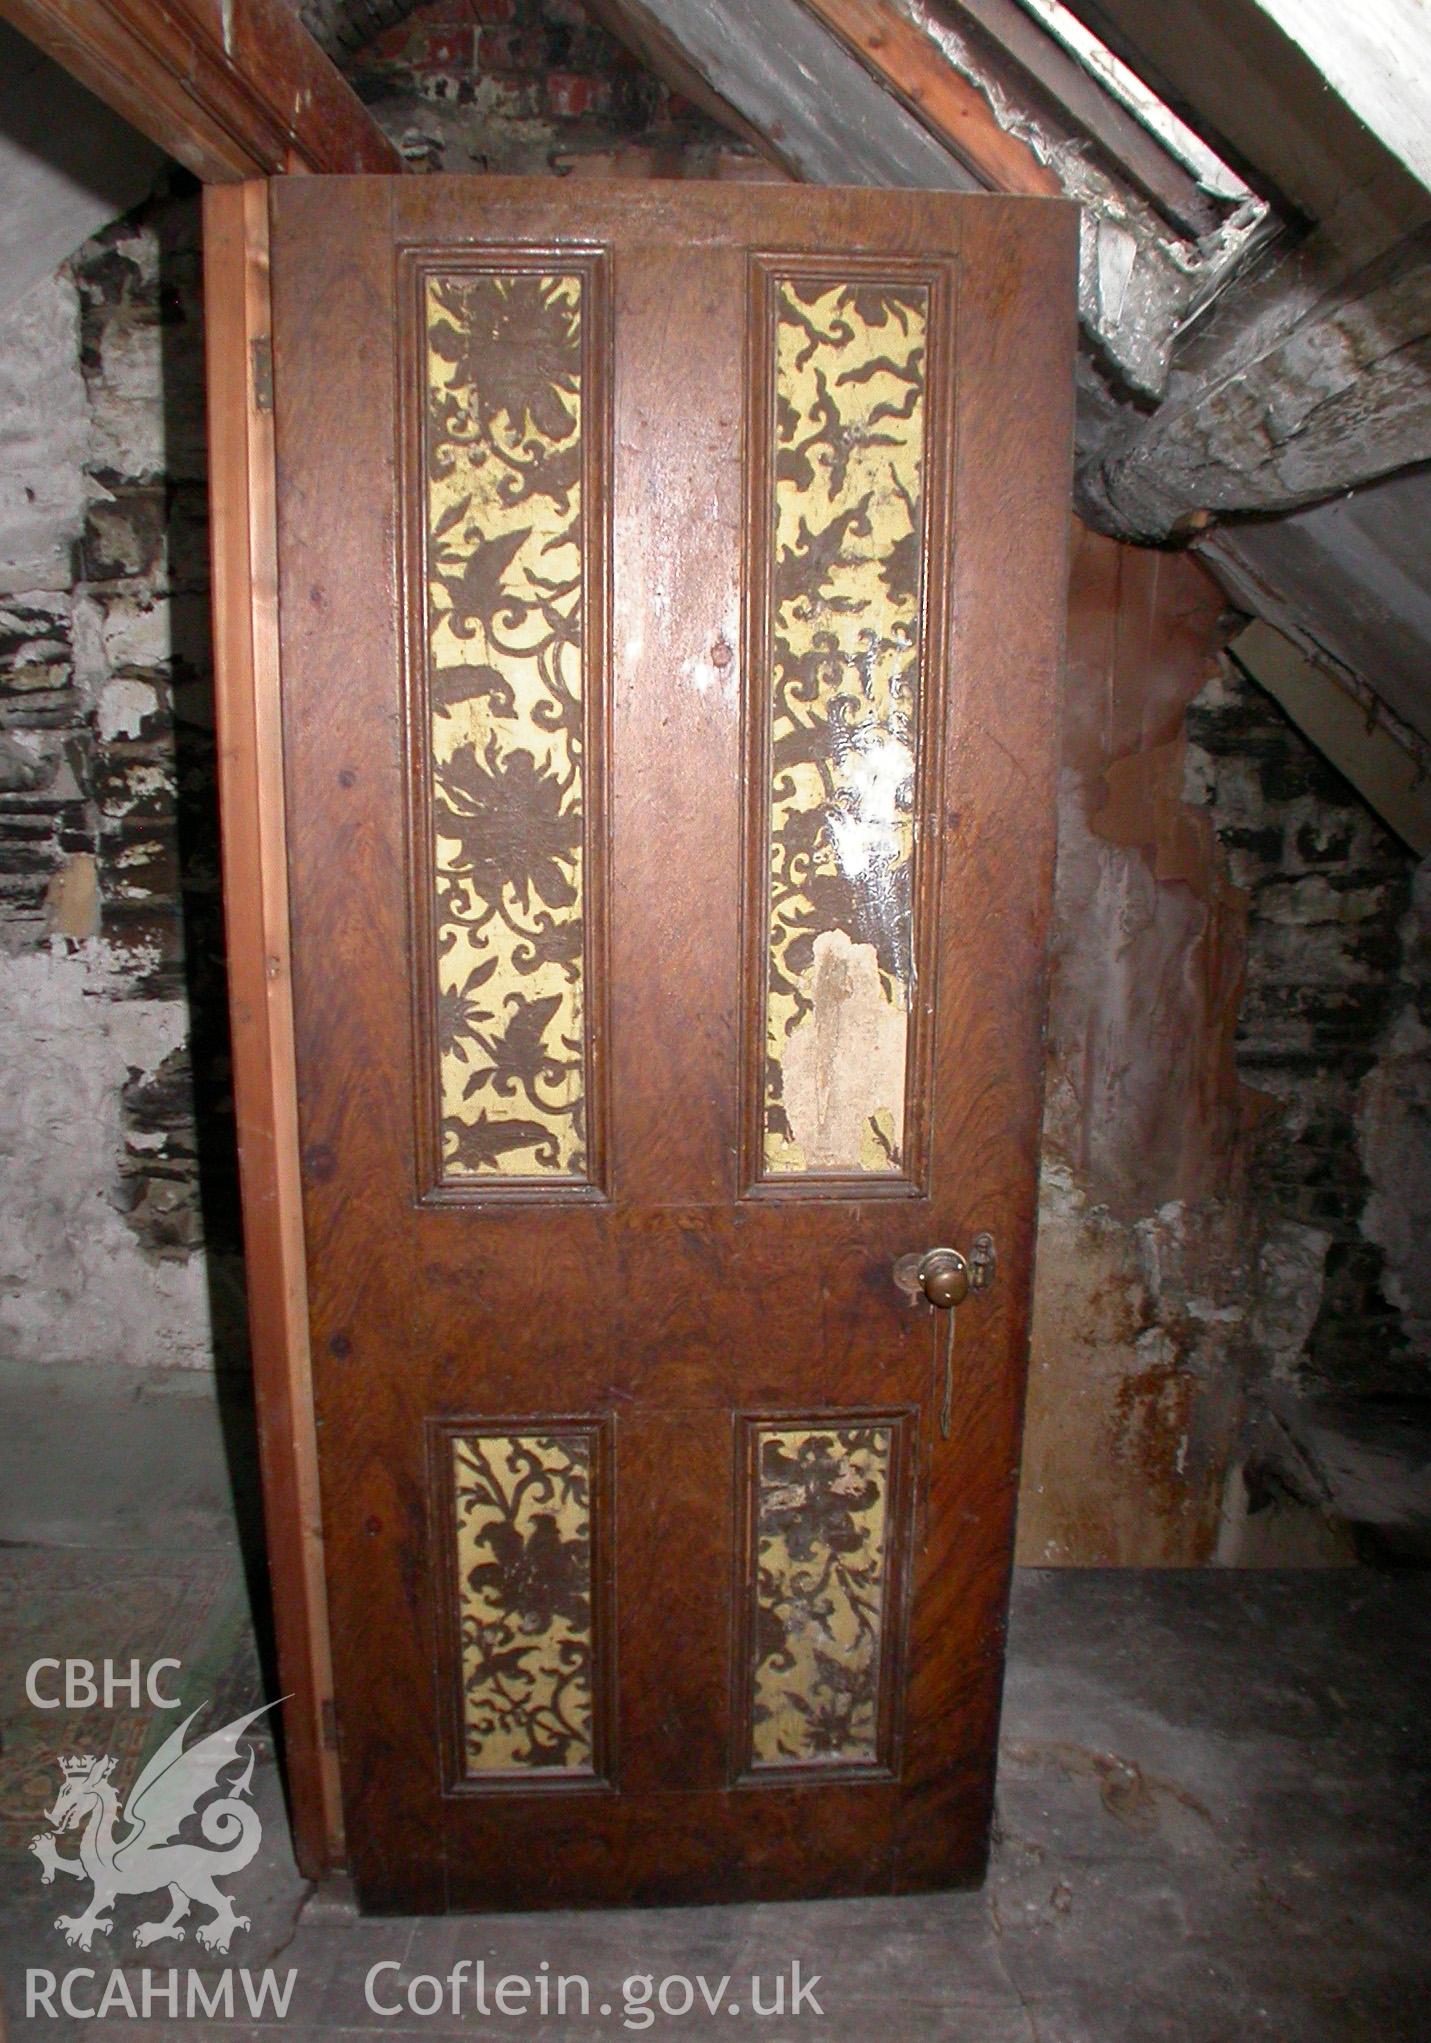 Four panelled door with inset panels surrounded by moulded beading, in attic.